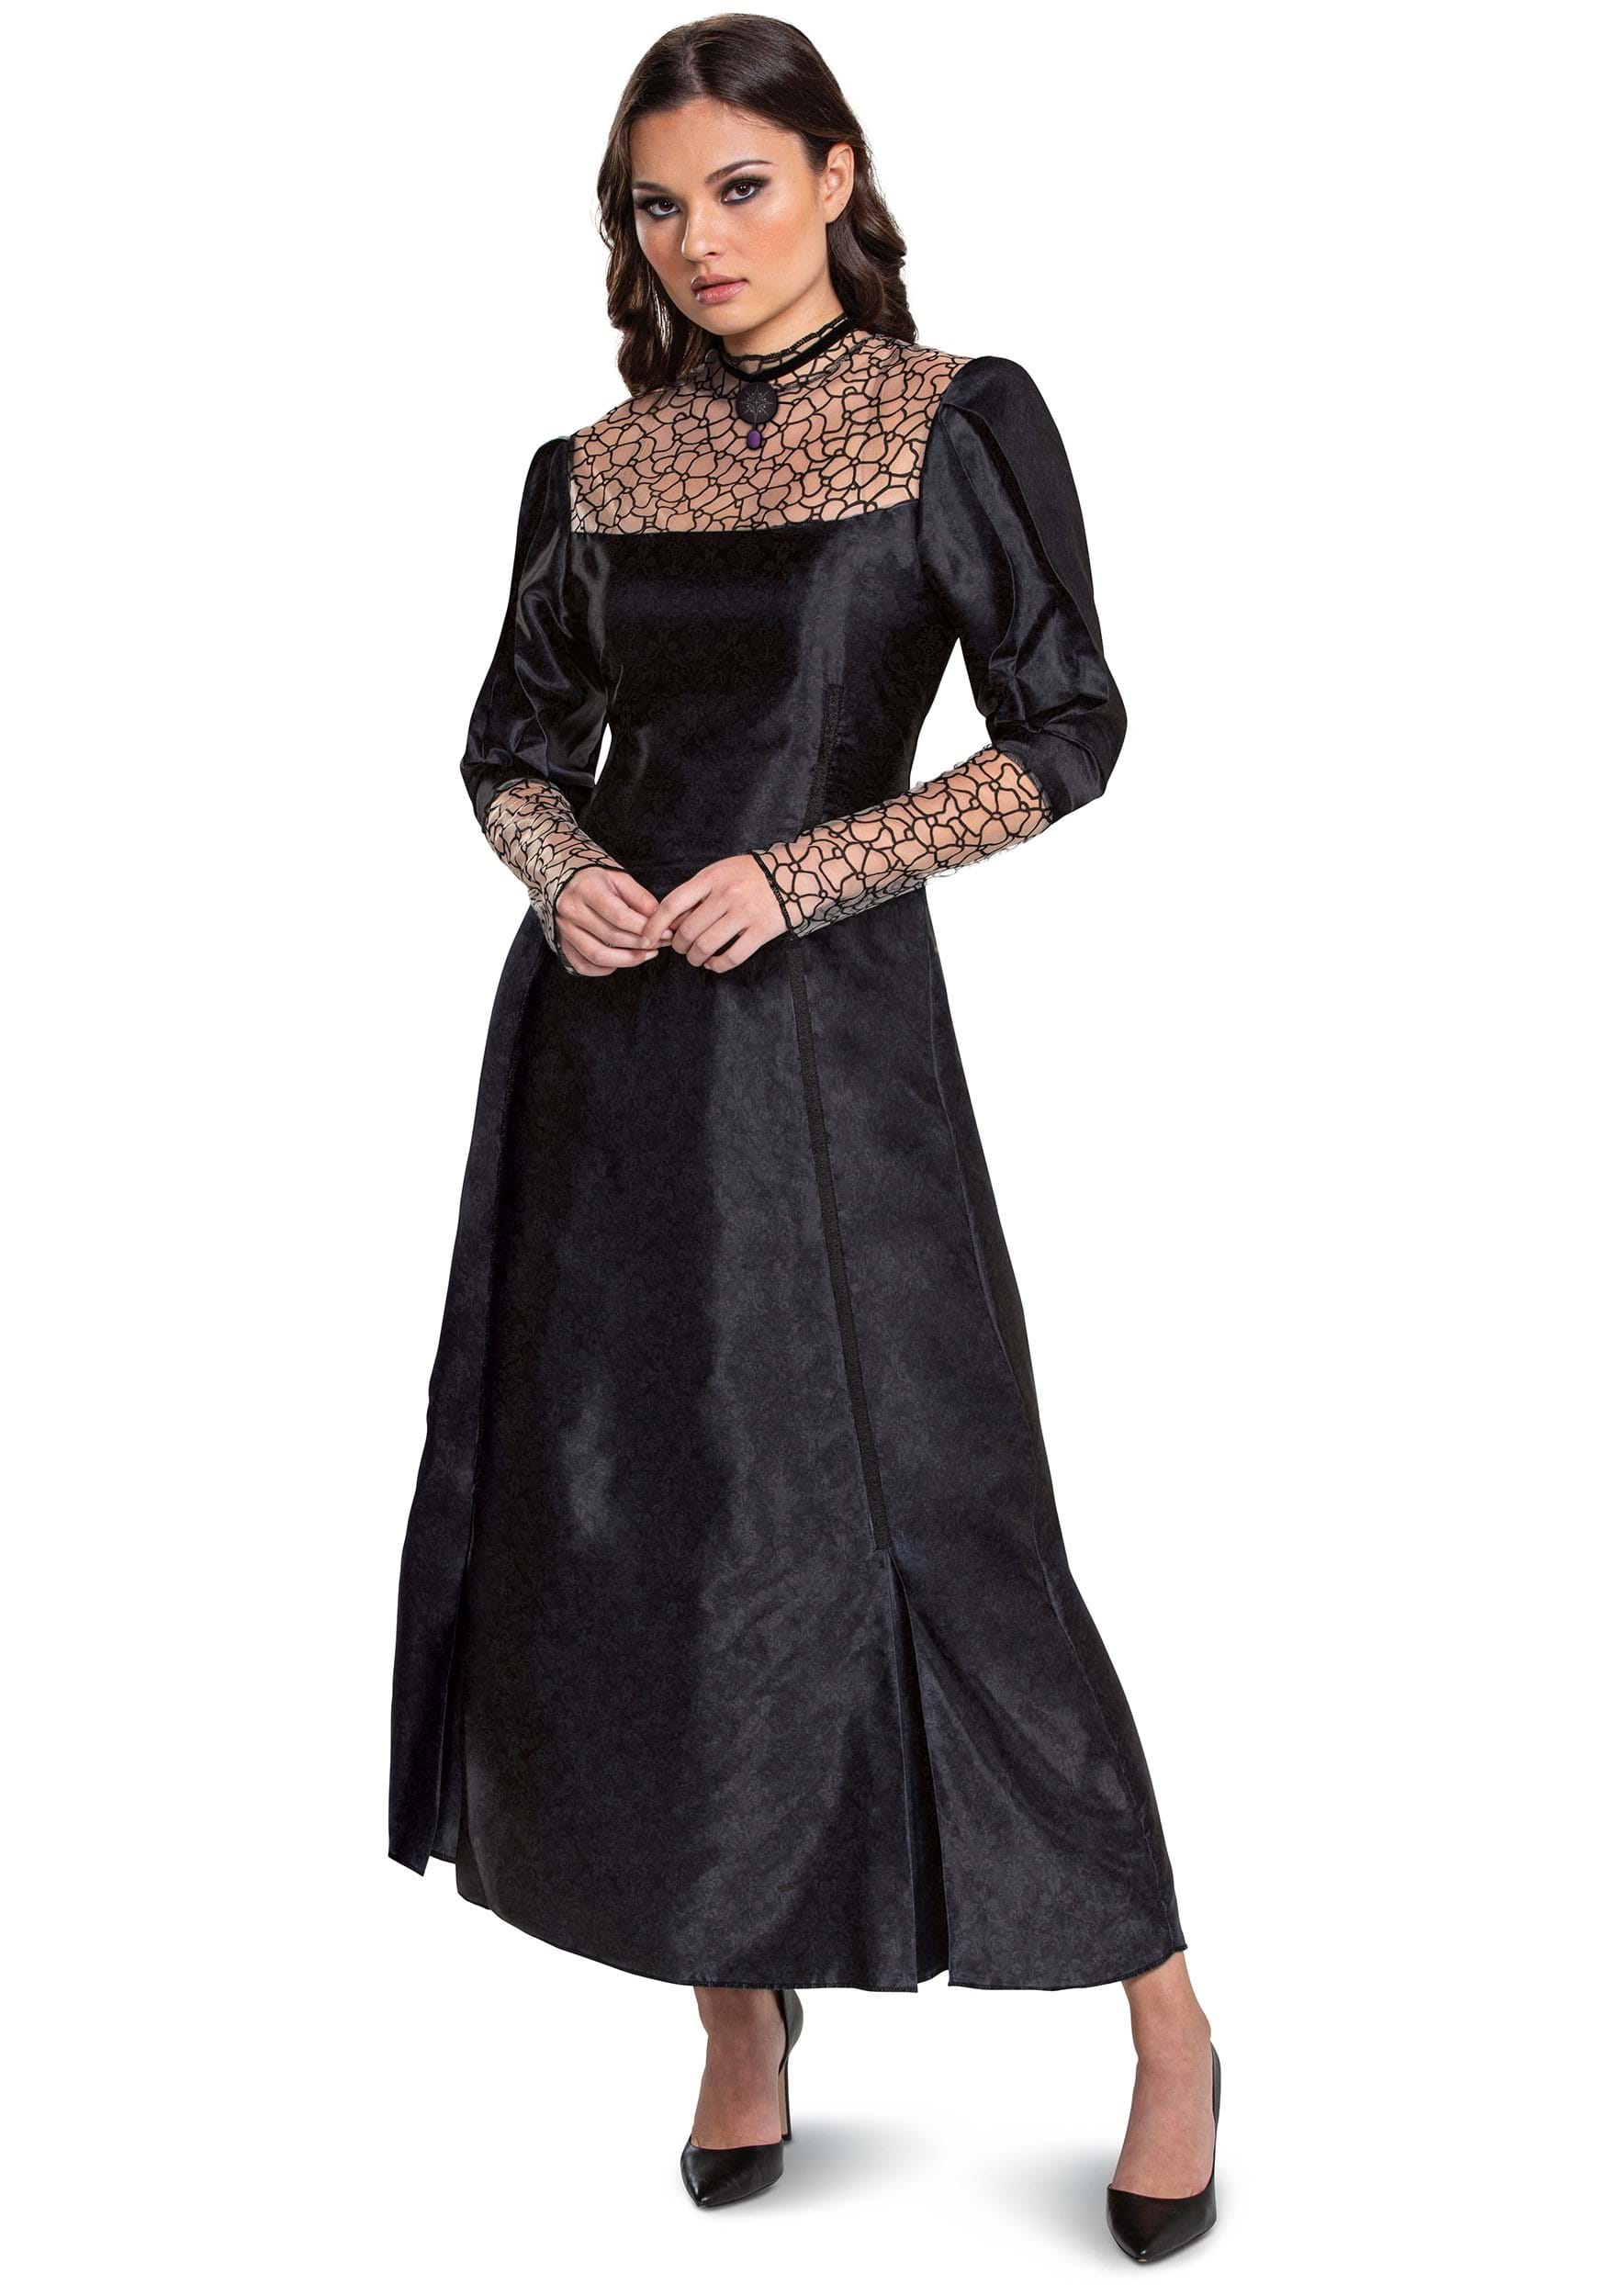 Photos - Fancy Dress Classic Disguise Women's The Witcher  Yennefer Costume Black/Beige DI12 